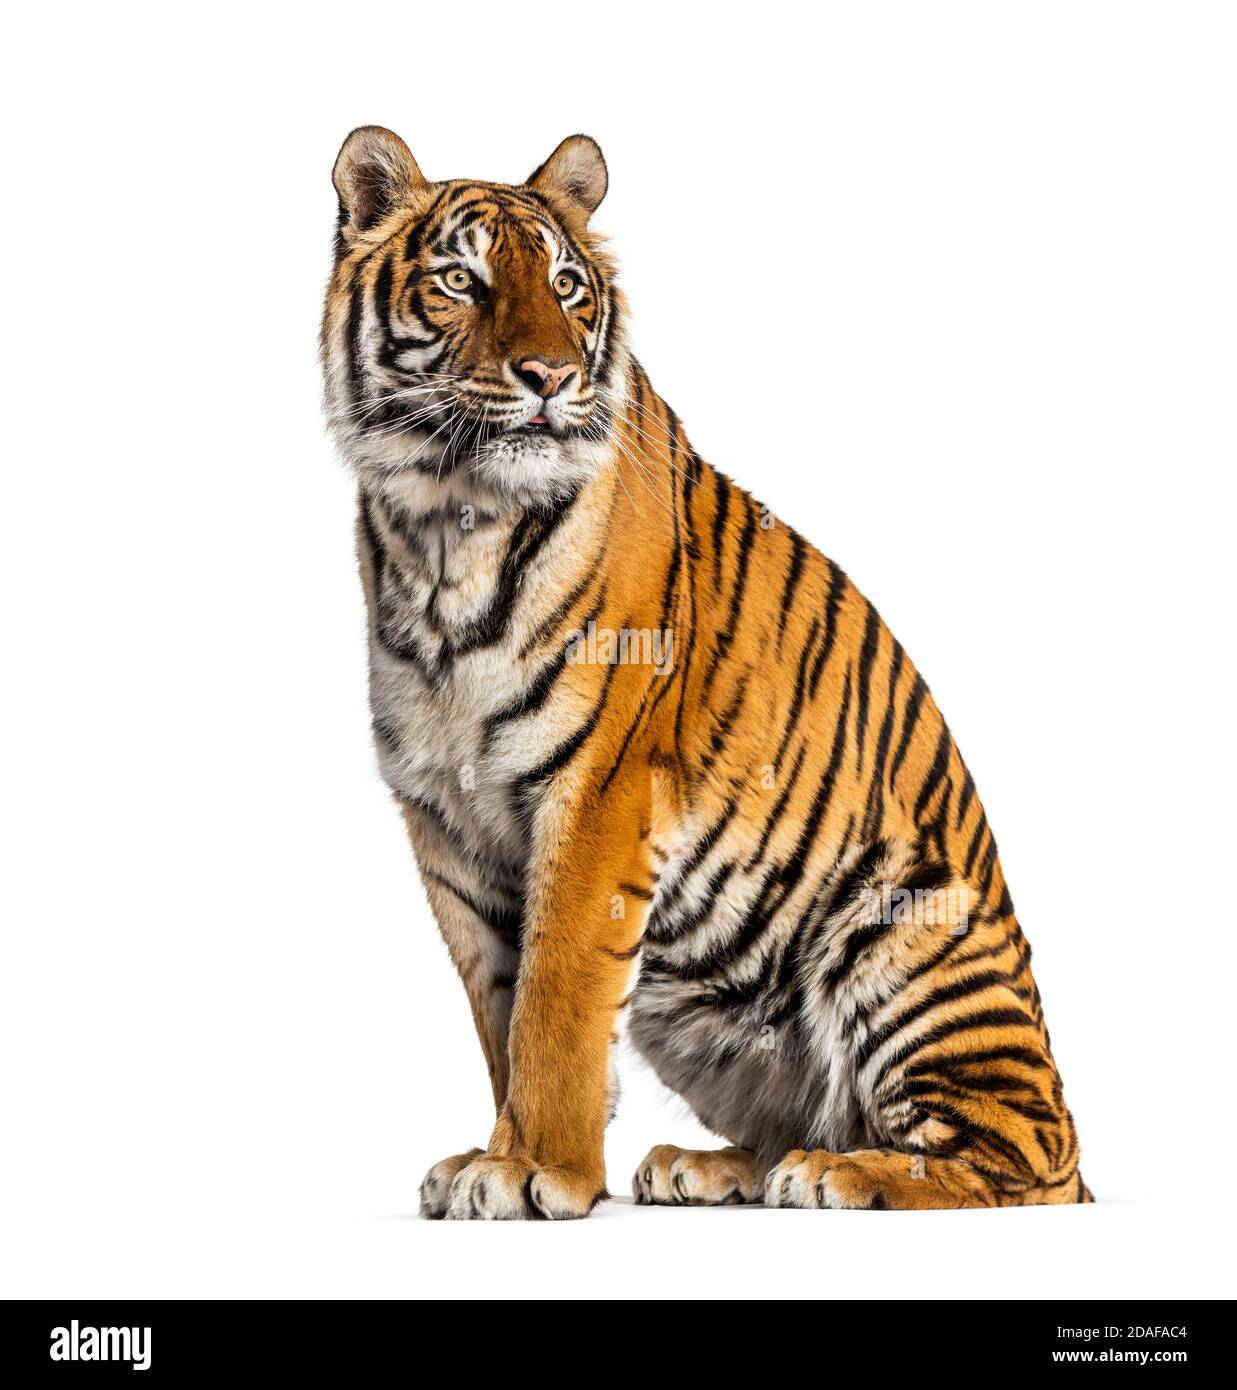 Tiger sitting in front of a white background Stock Photo